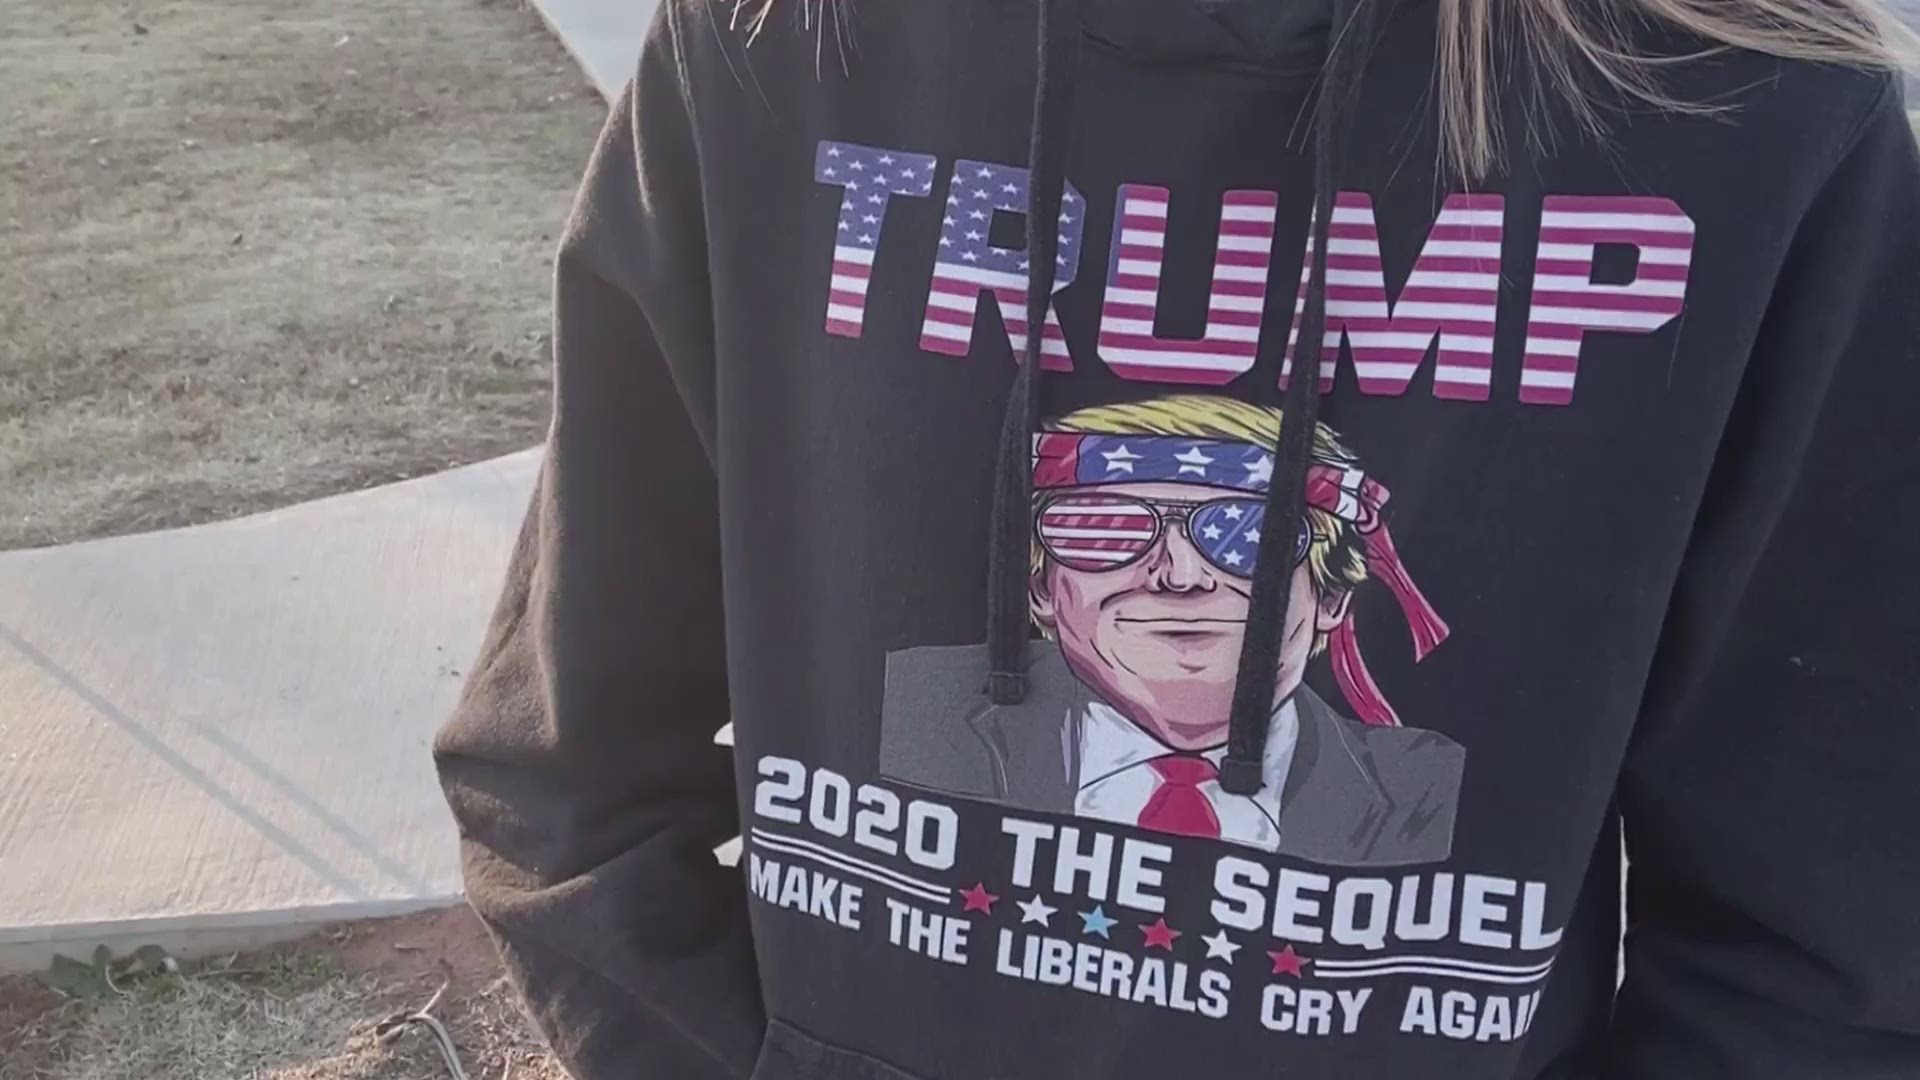 A mother claims her daughter's classmates threatened to shoot the girl because she wore a sweatshirt depicting President Donald Trump.